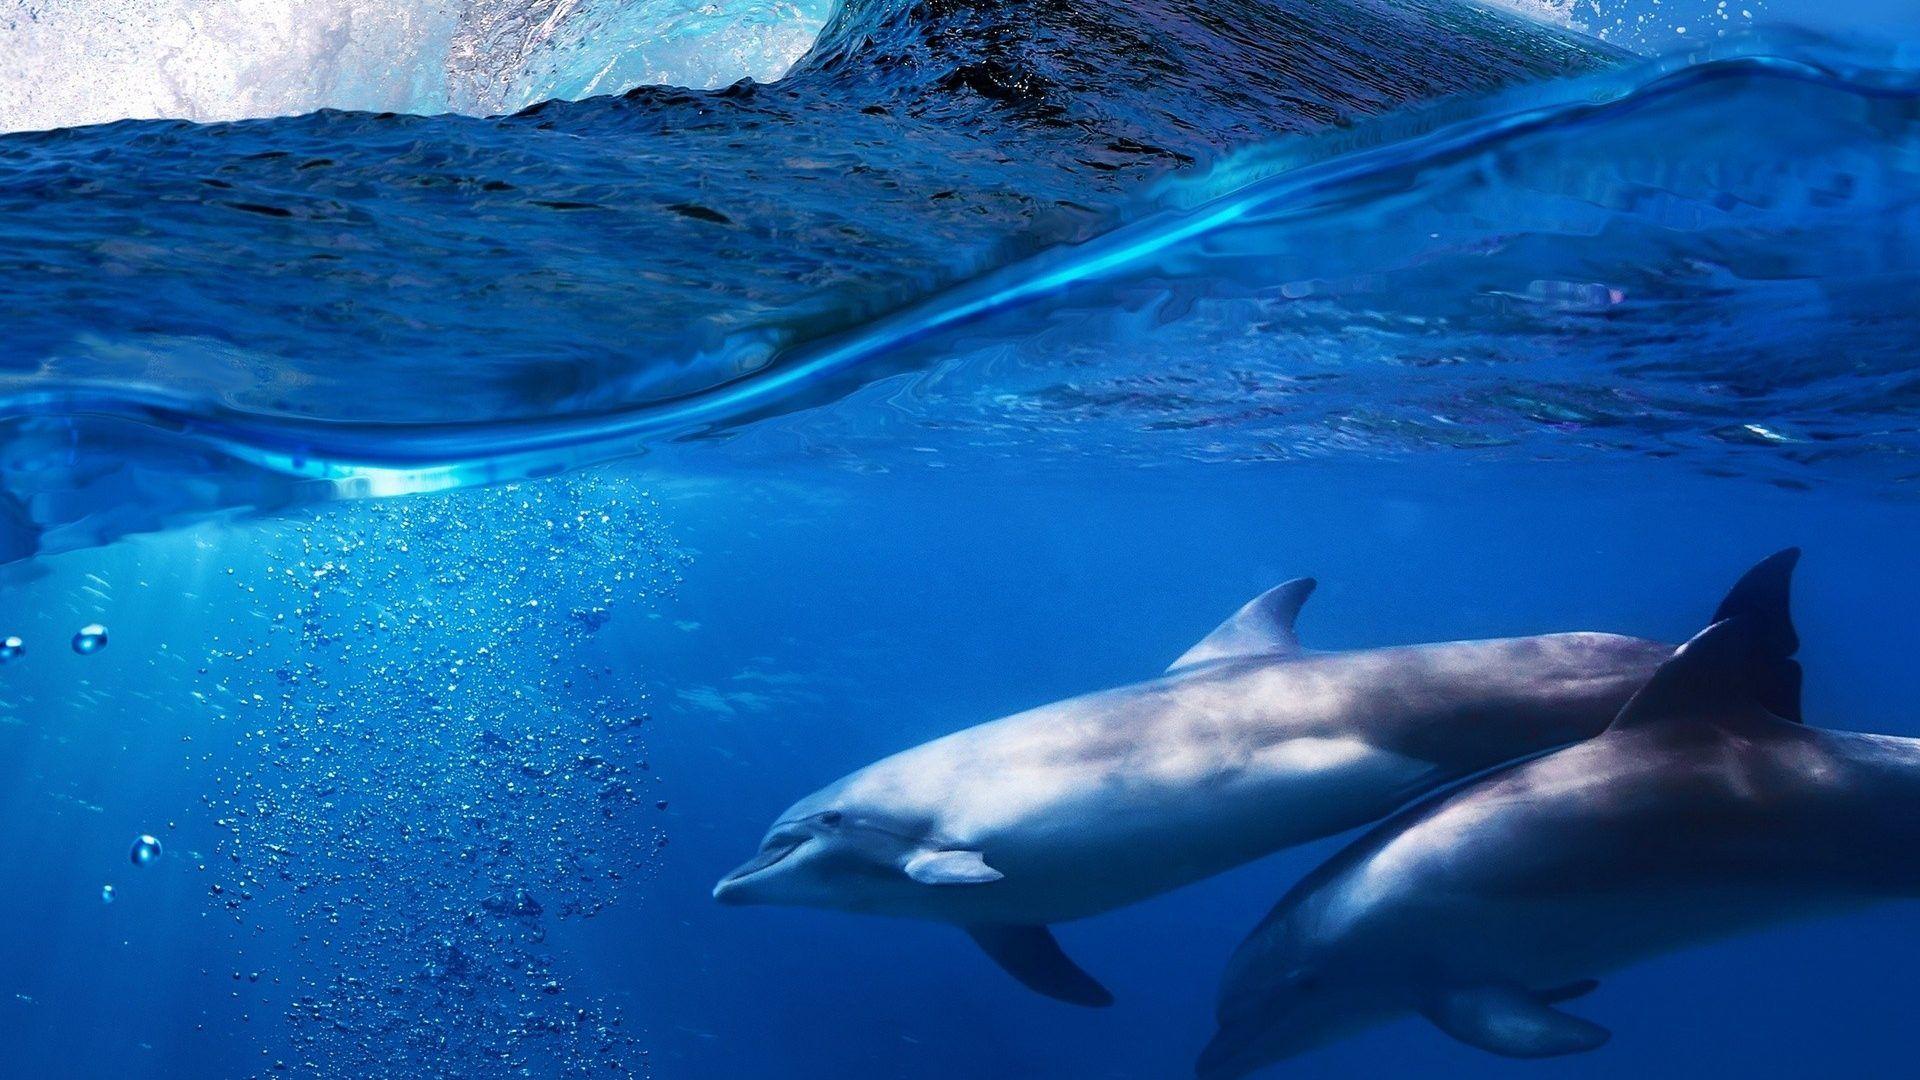 Dolphin Tag wallpaper: Dolphins Dolphin Ocean Underwater